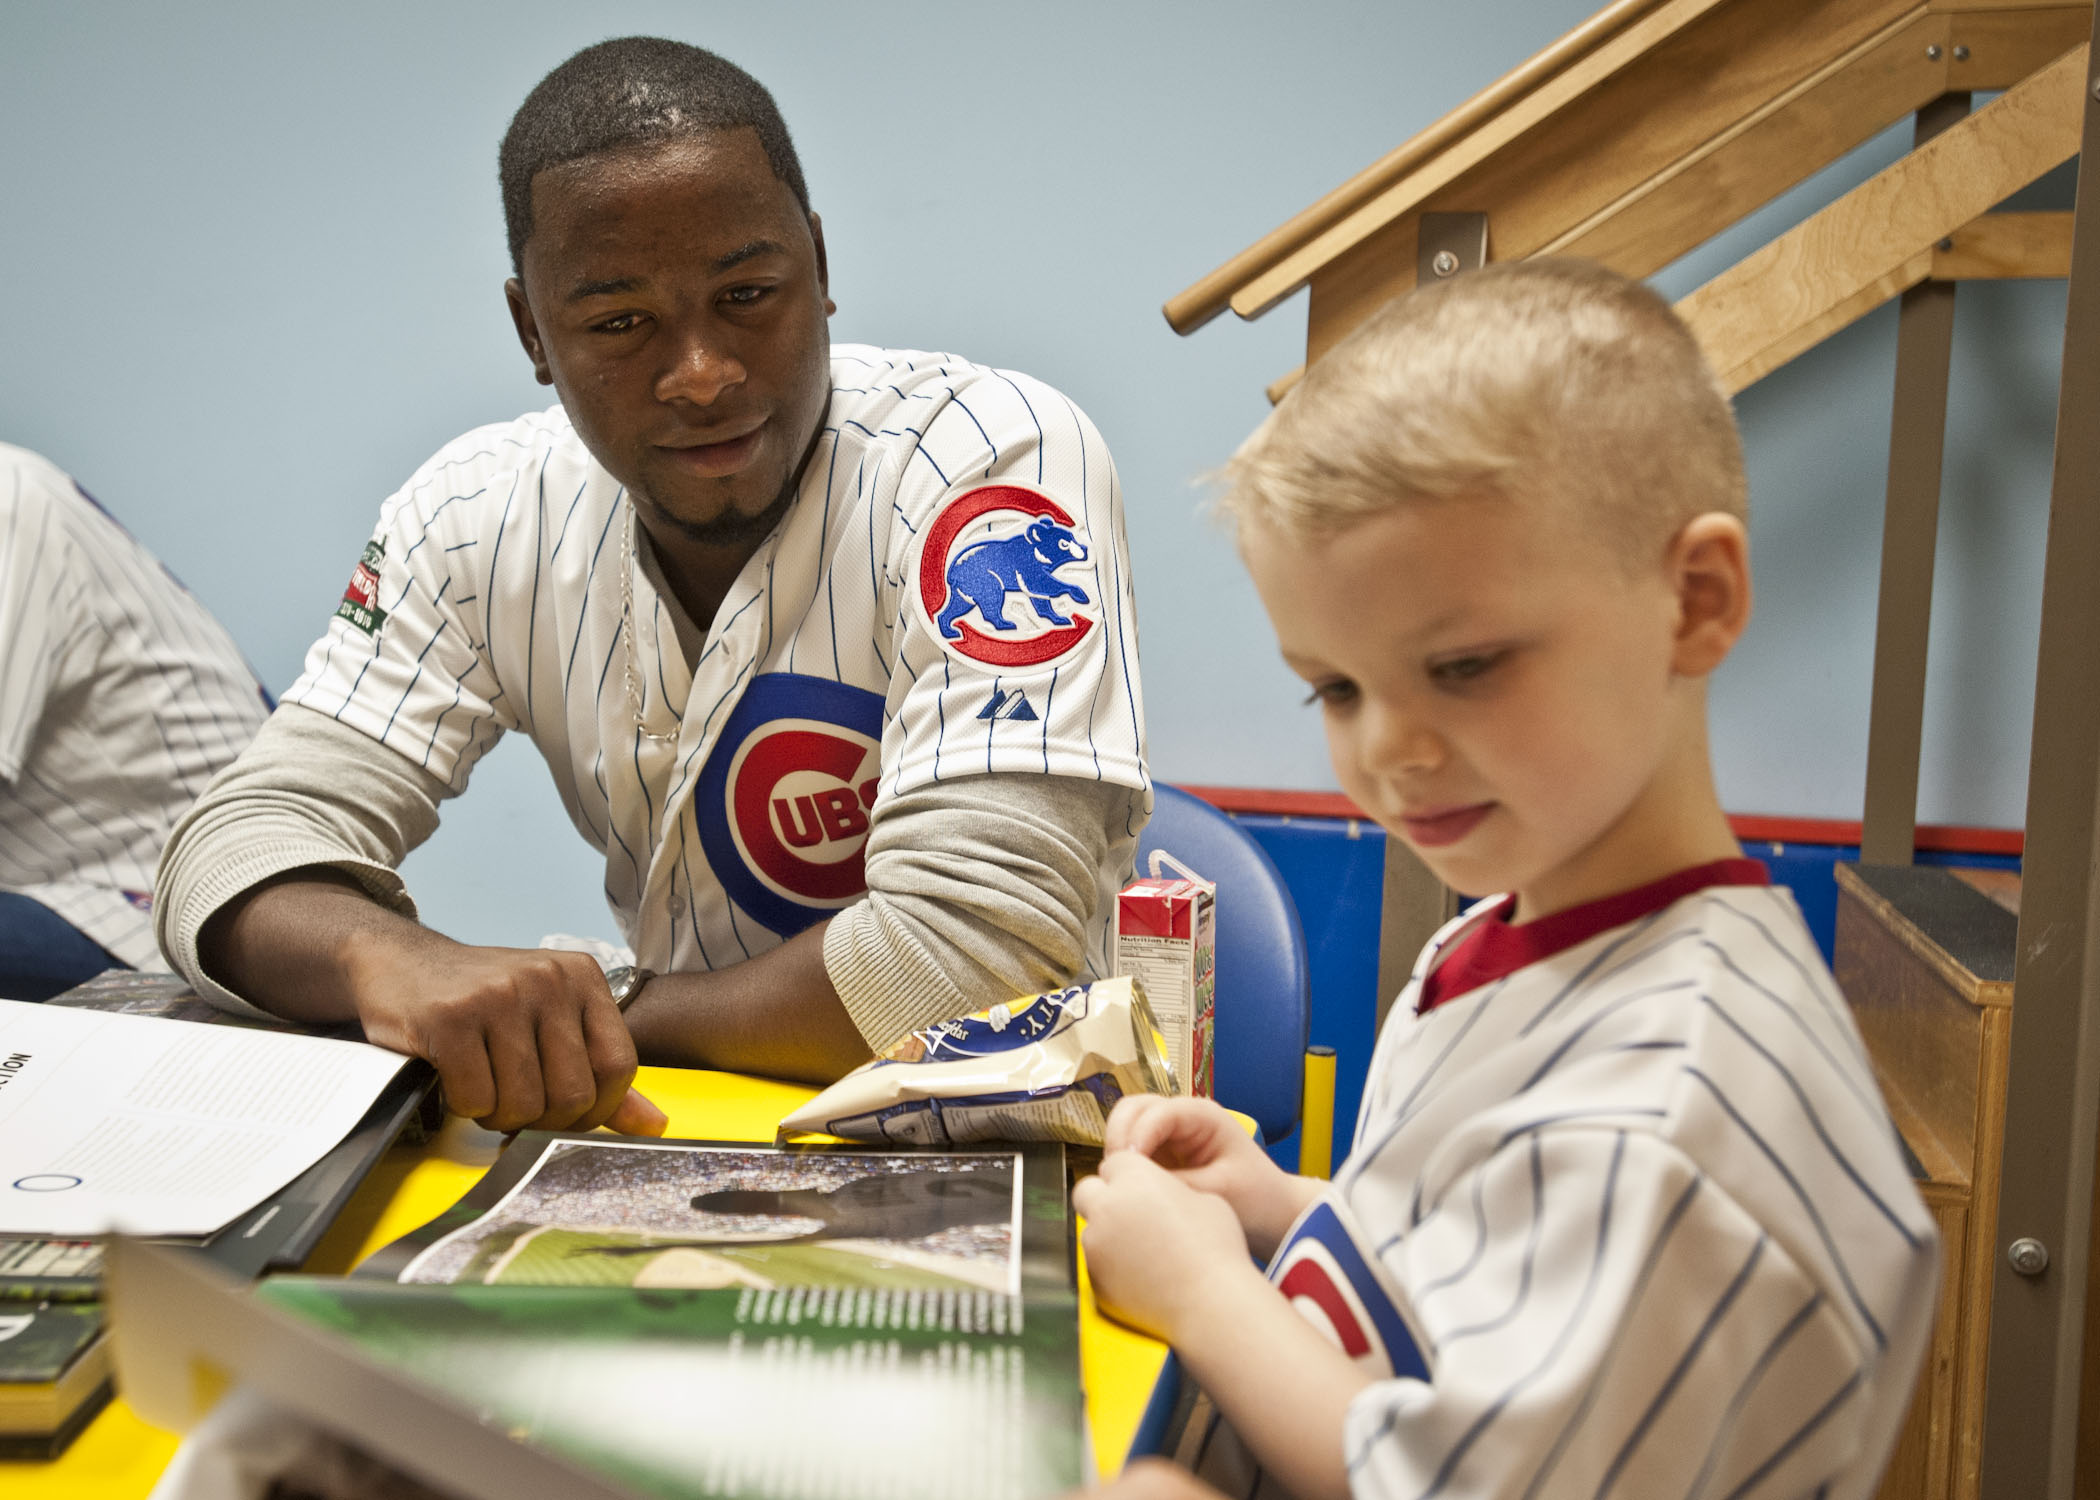 Cubs prospect Arodys Vizcaino looks through a Wrigley Field book with this little guy.